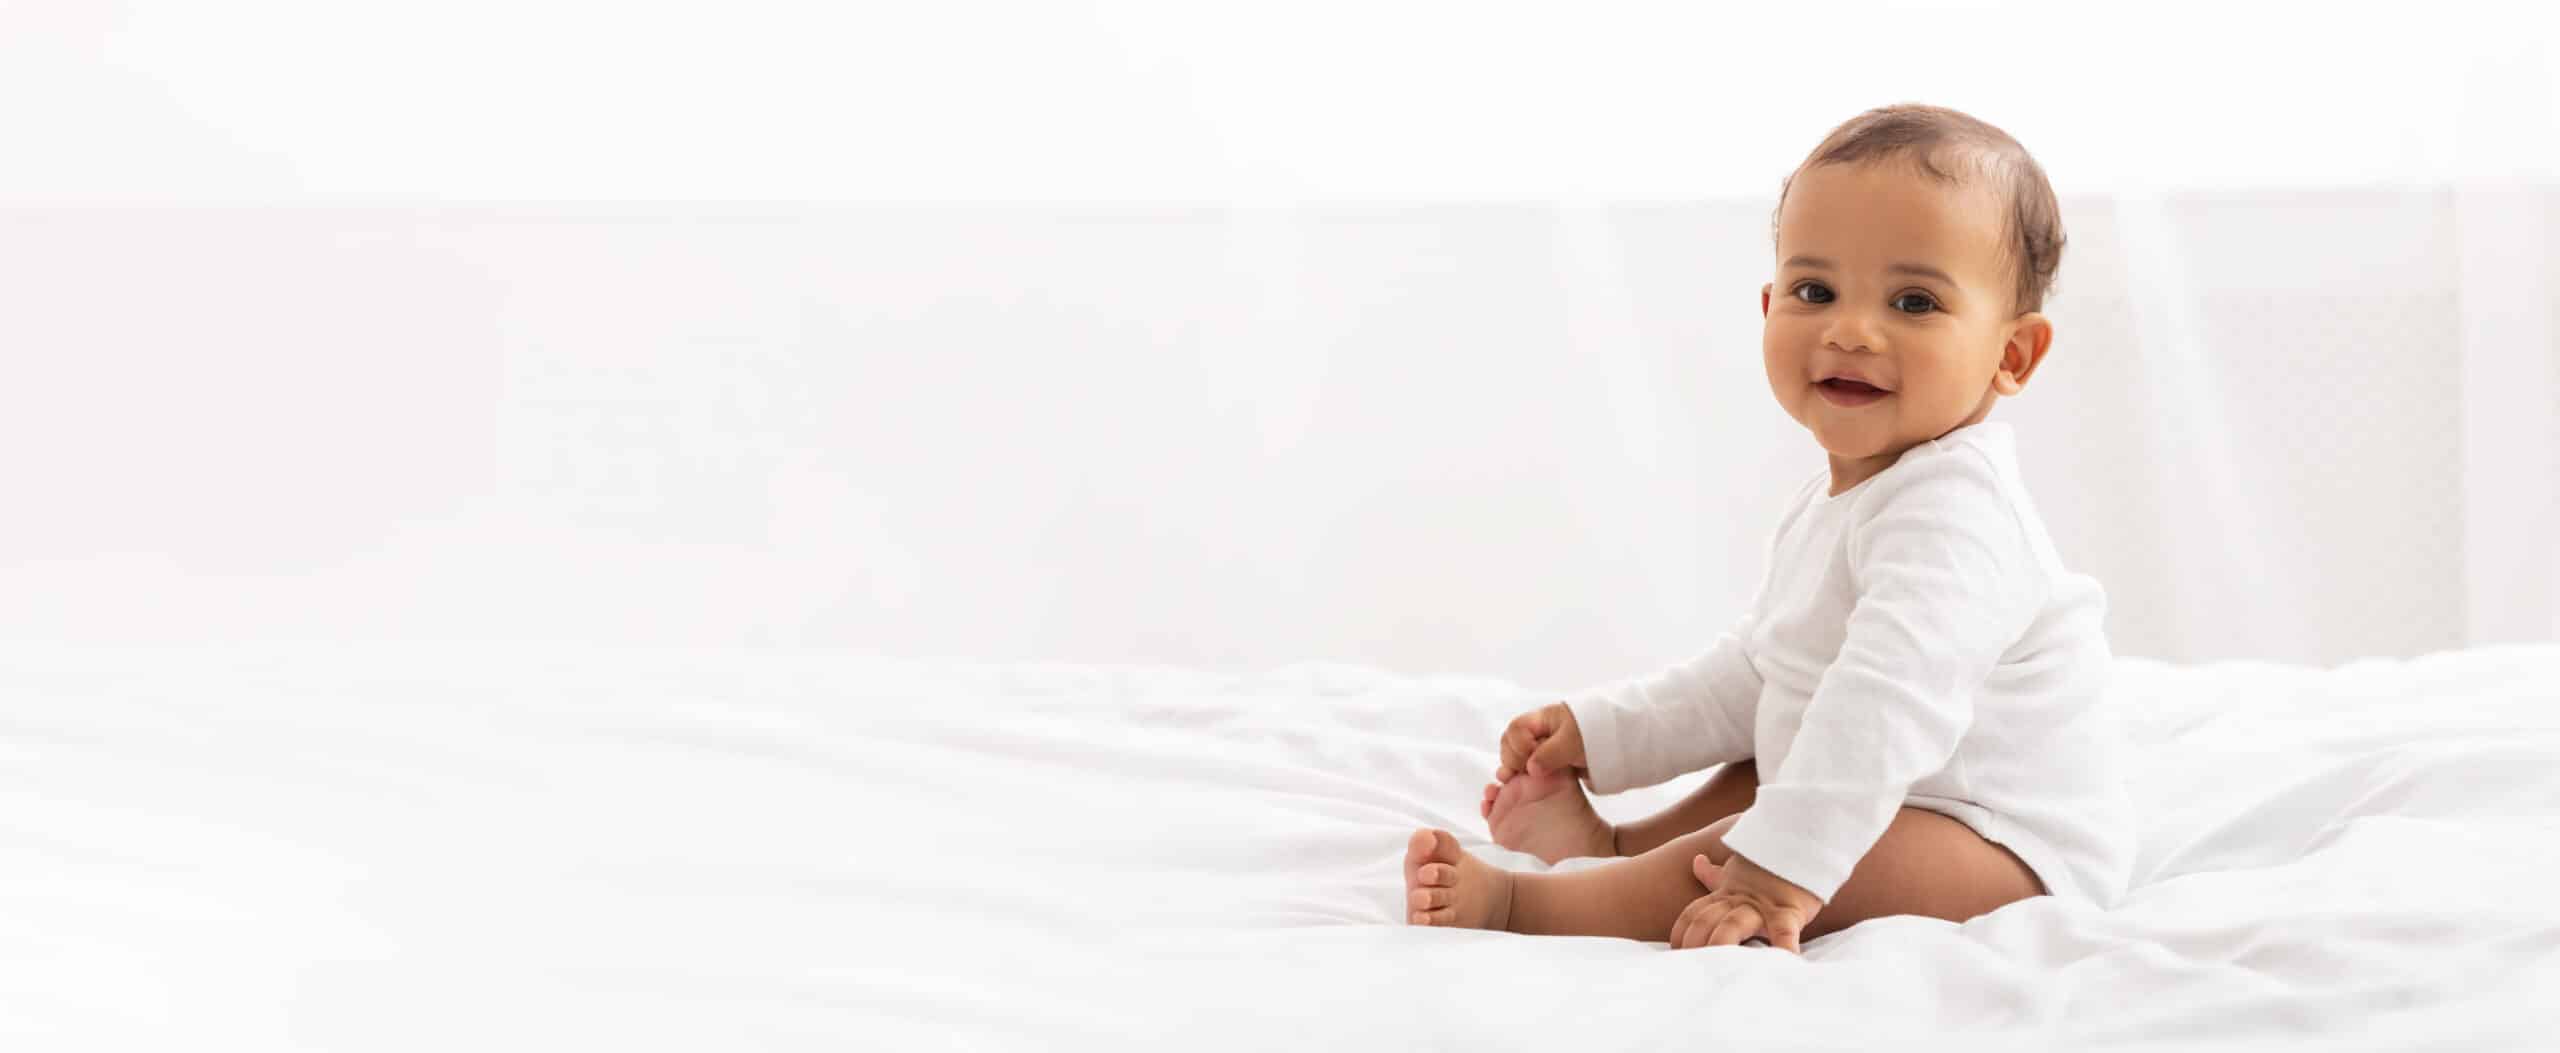 Happy Black Little Baby Girl Sitting On Bed Looking At Camera And Smiling In Bedroom At Home. Advertisement Banner With Cute Child Posing Indoor. Panorama With Copy Space For Your Text